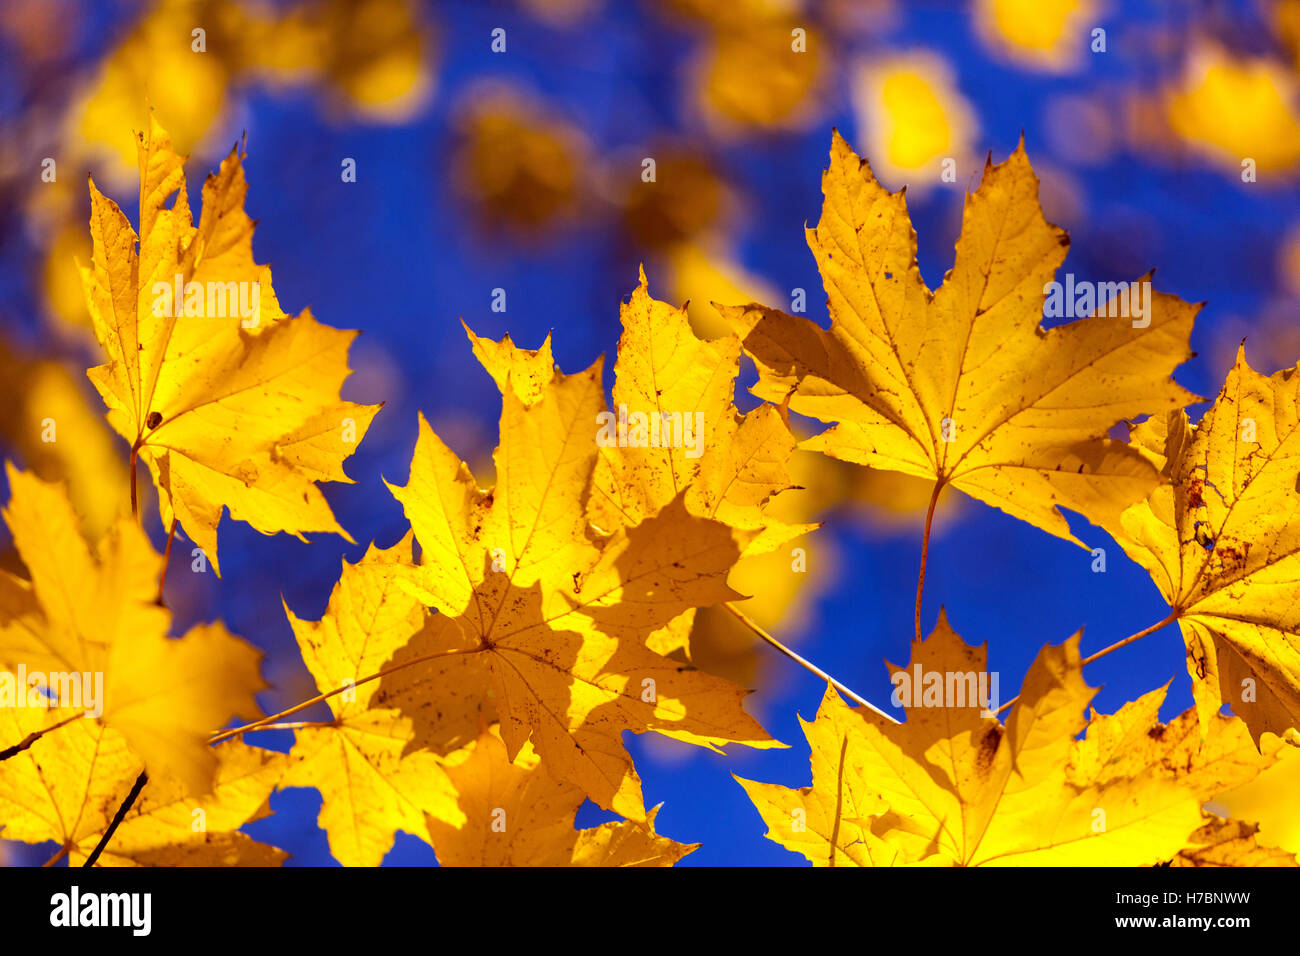 Yellow maple leaves Norway maple Leaves sunlight autumn Stock Photo